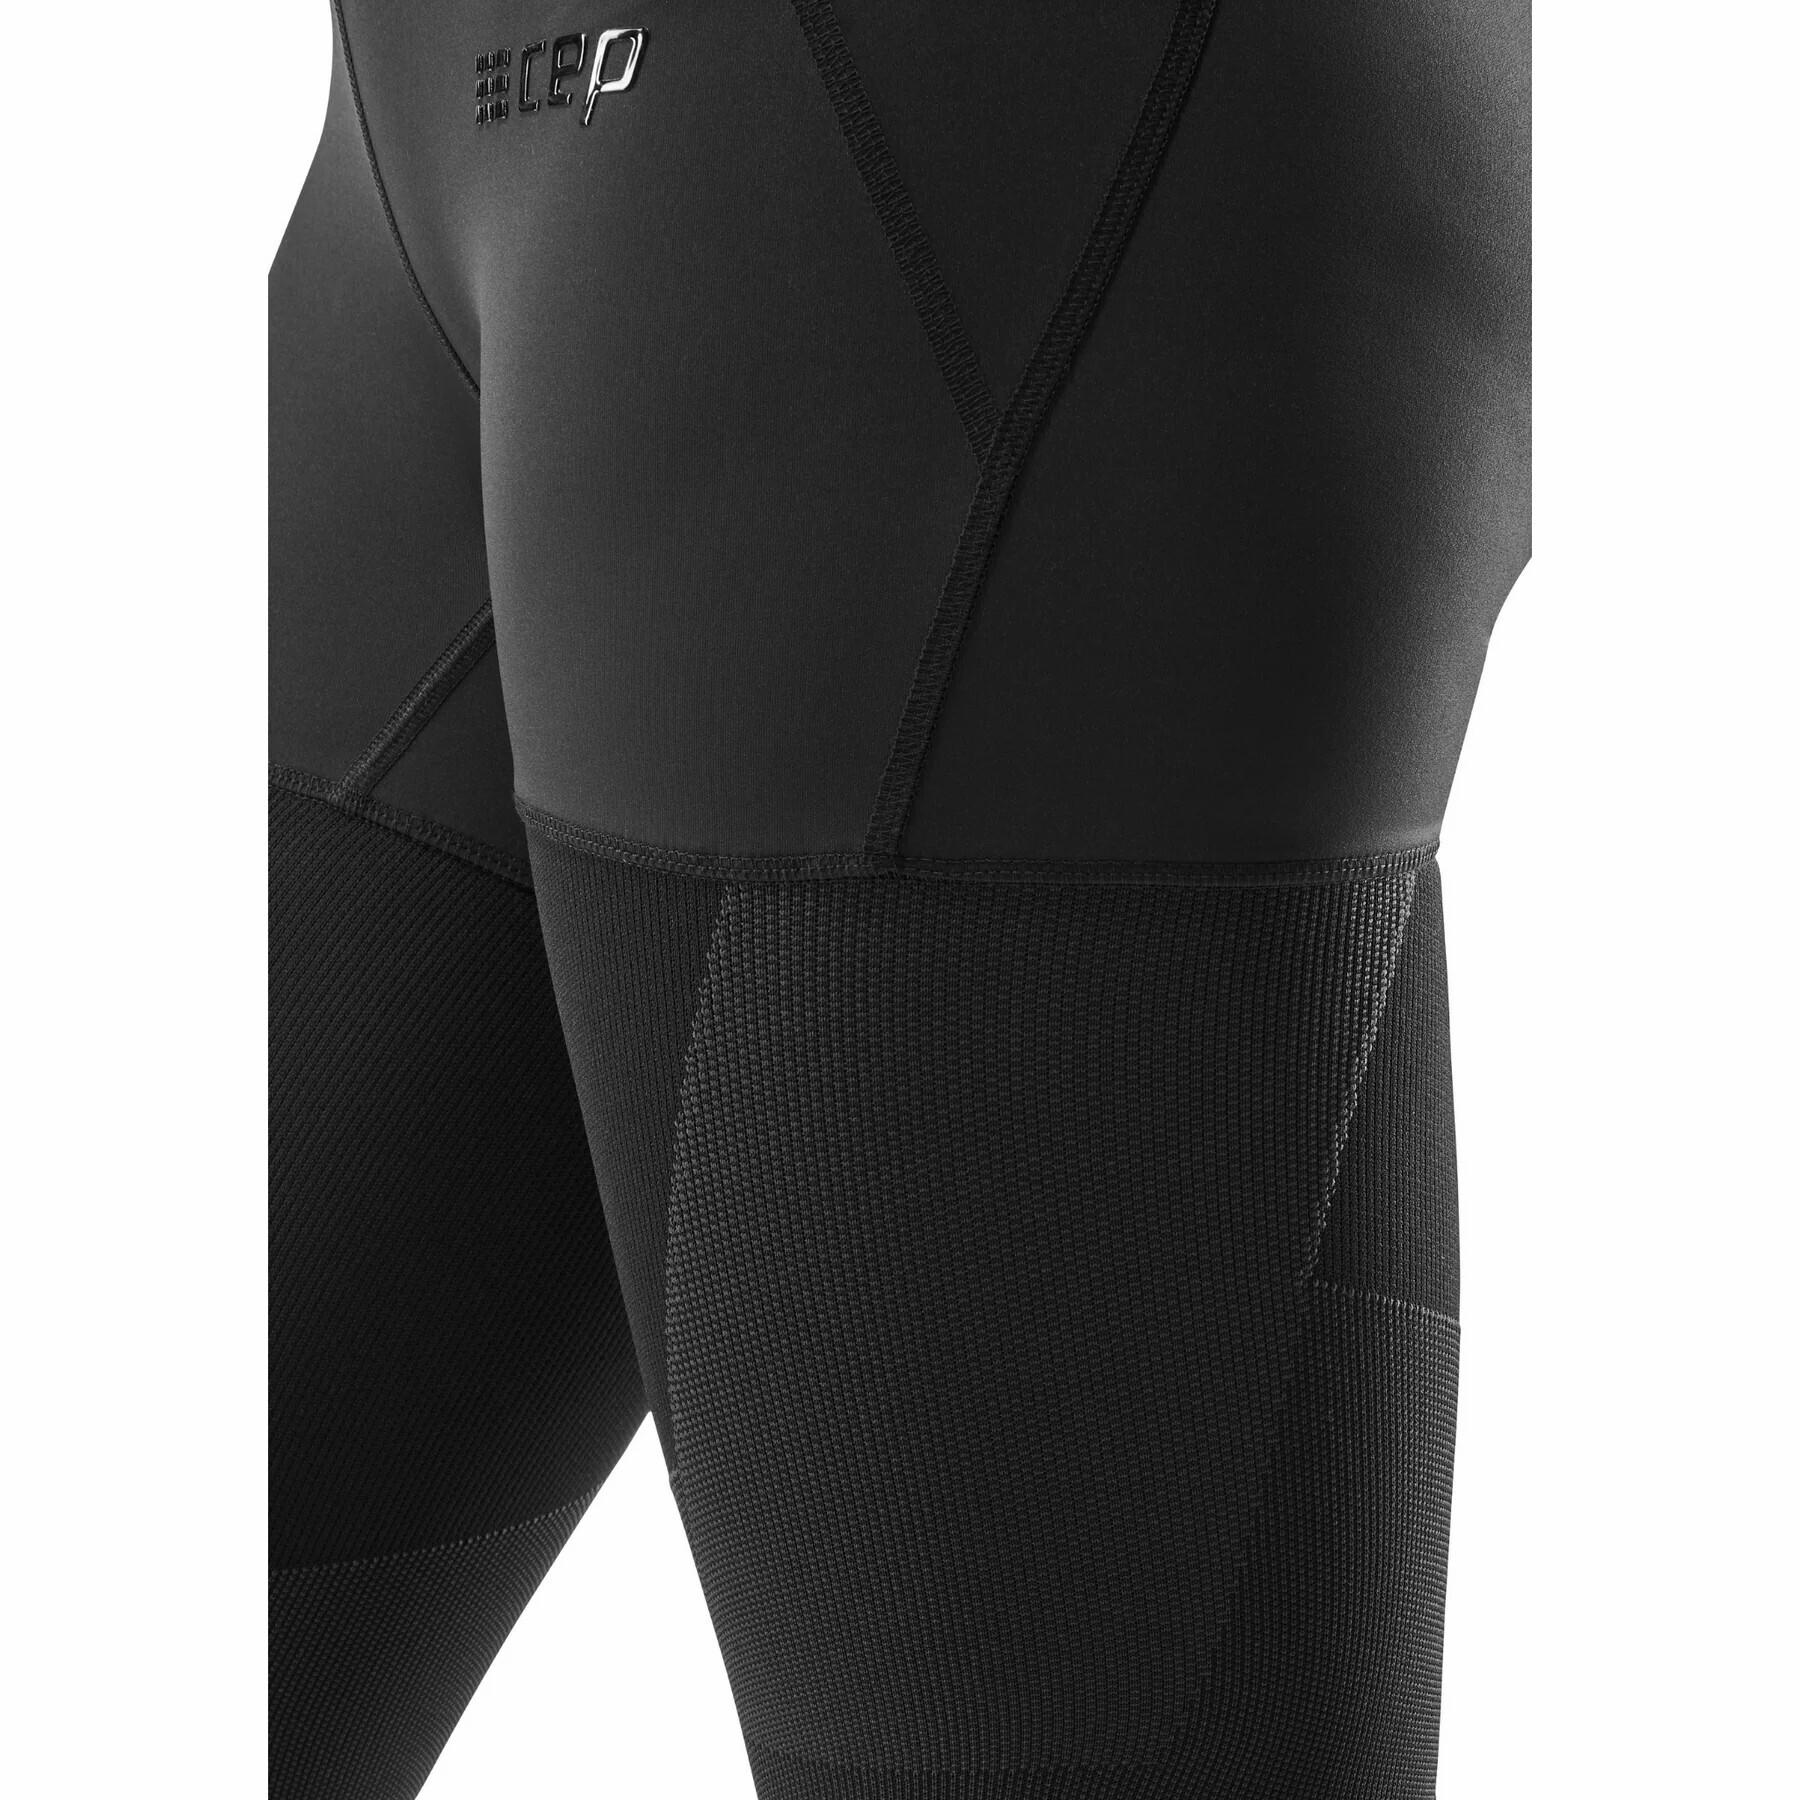 Cuissard femme CEP Compression